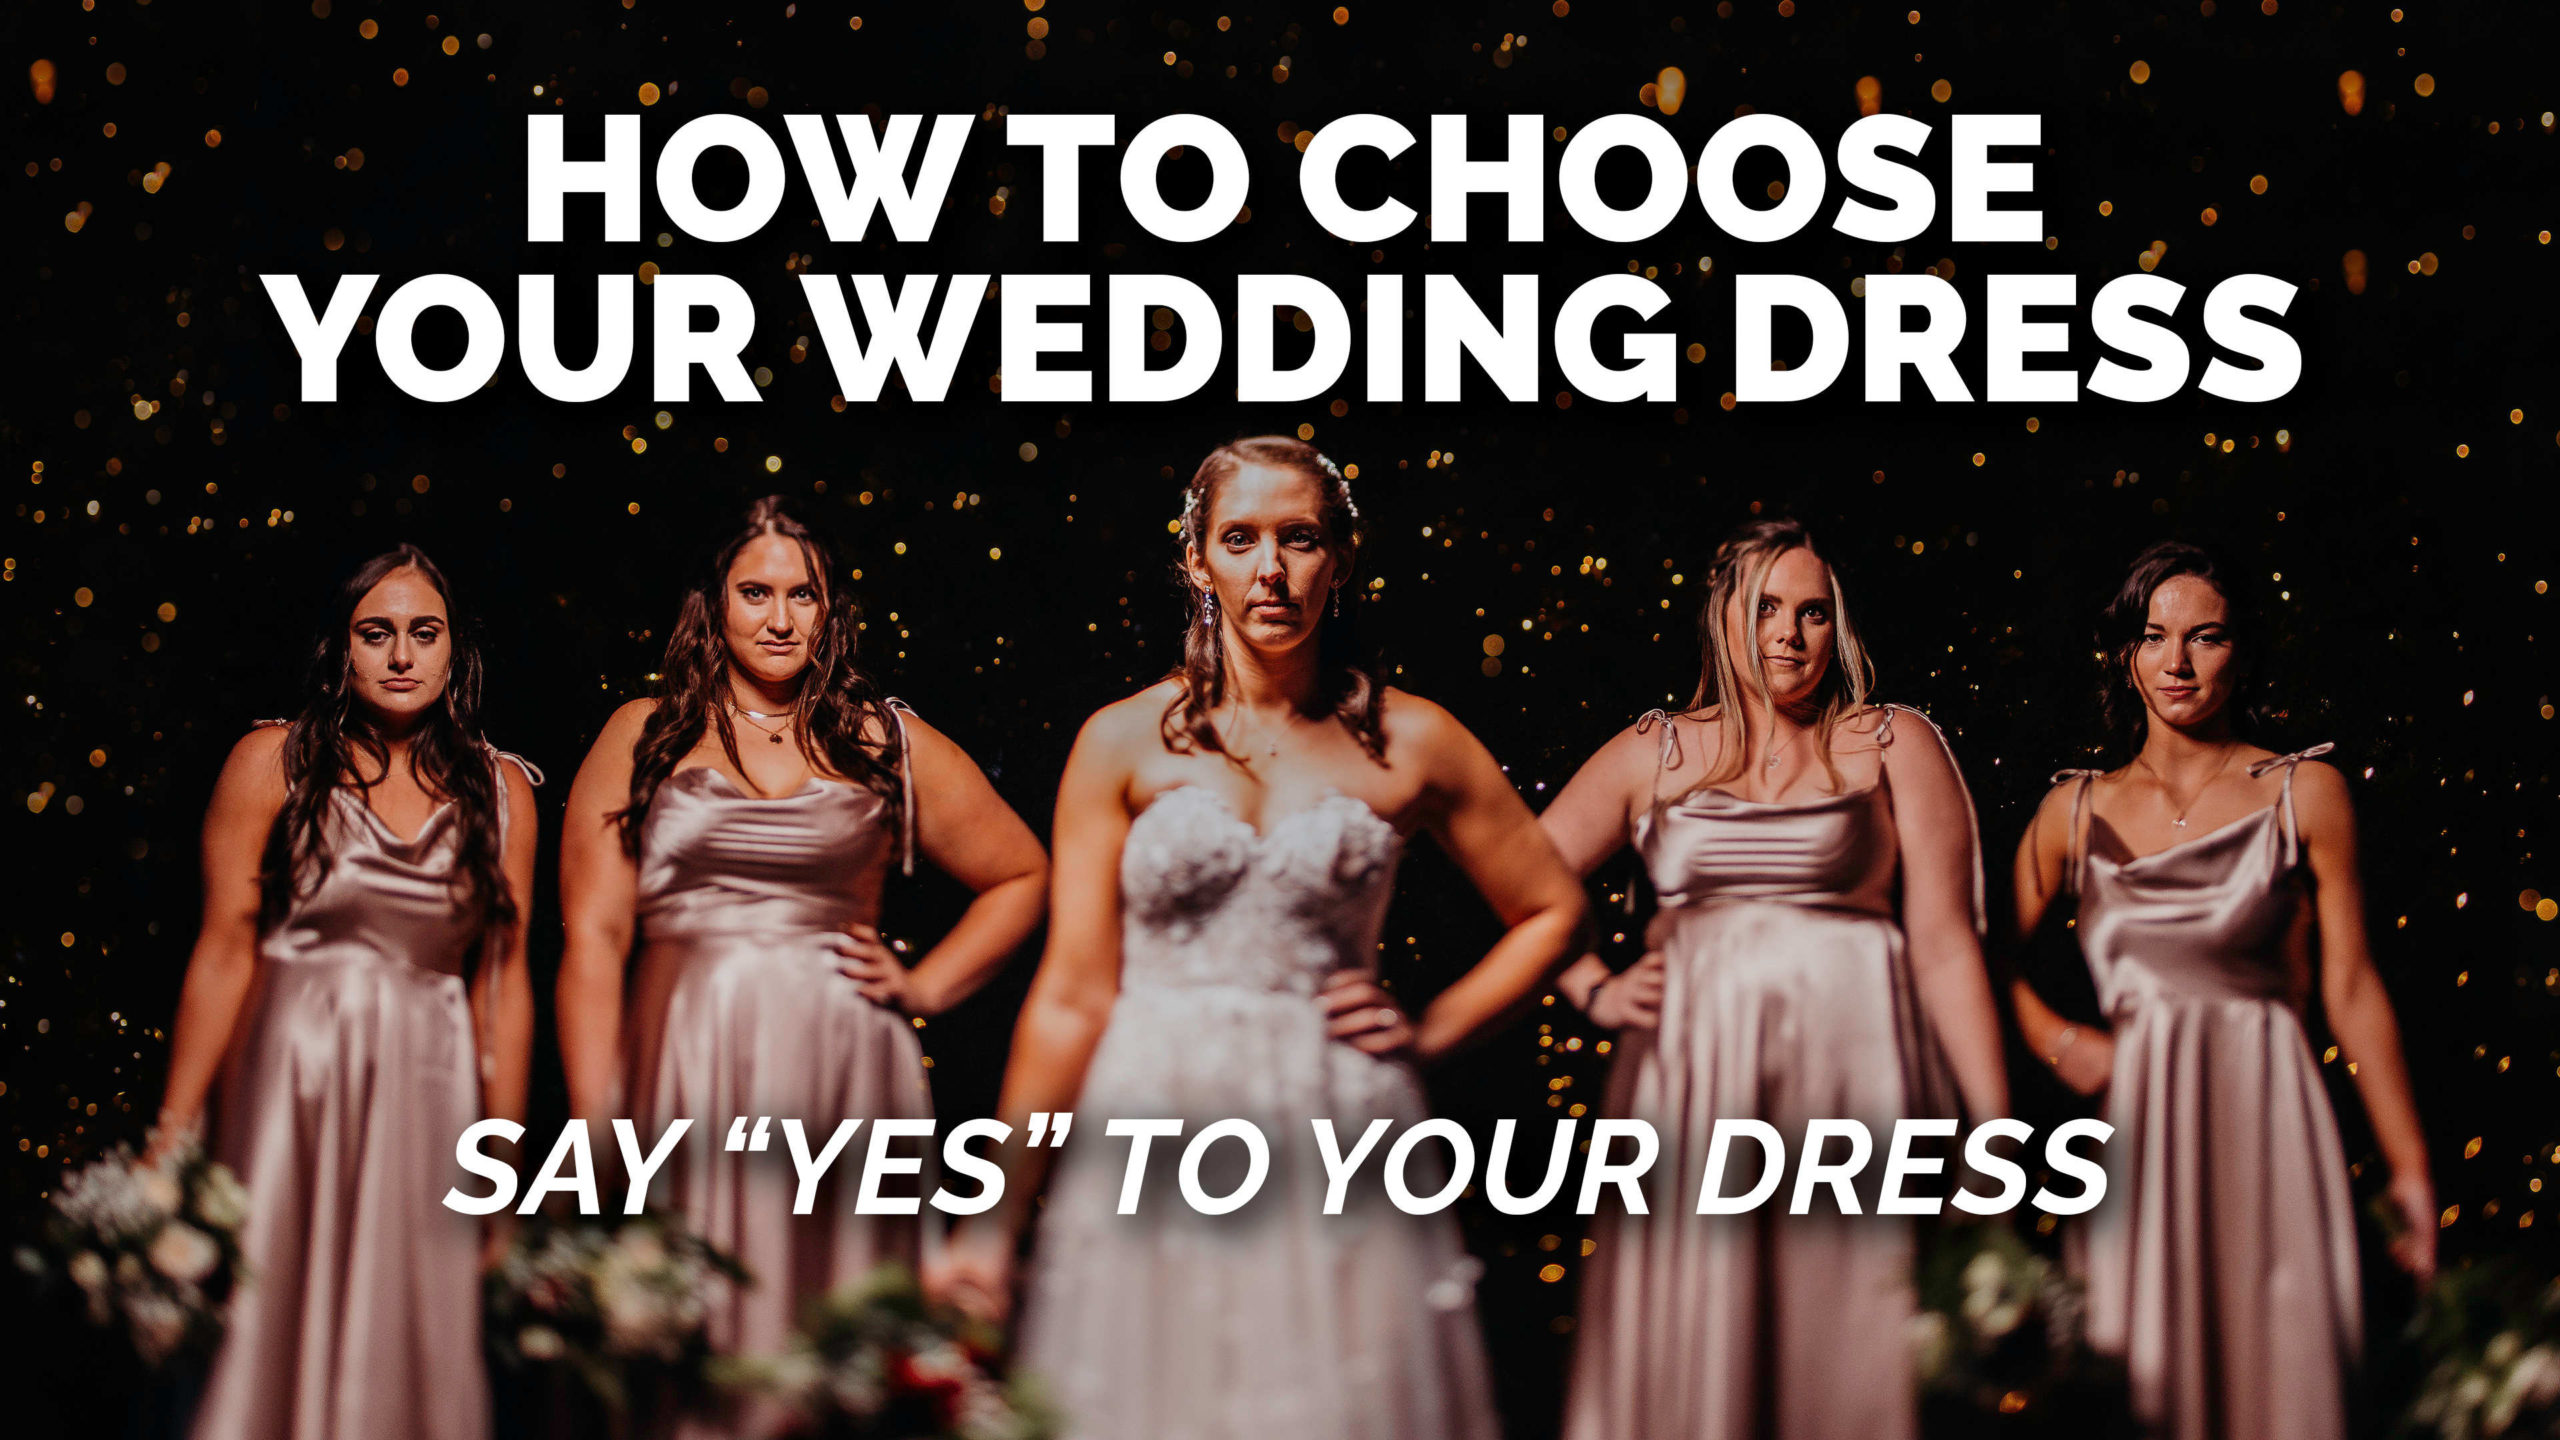 How to choose your wedding dress YouTube video thumbnail image.